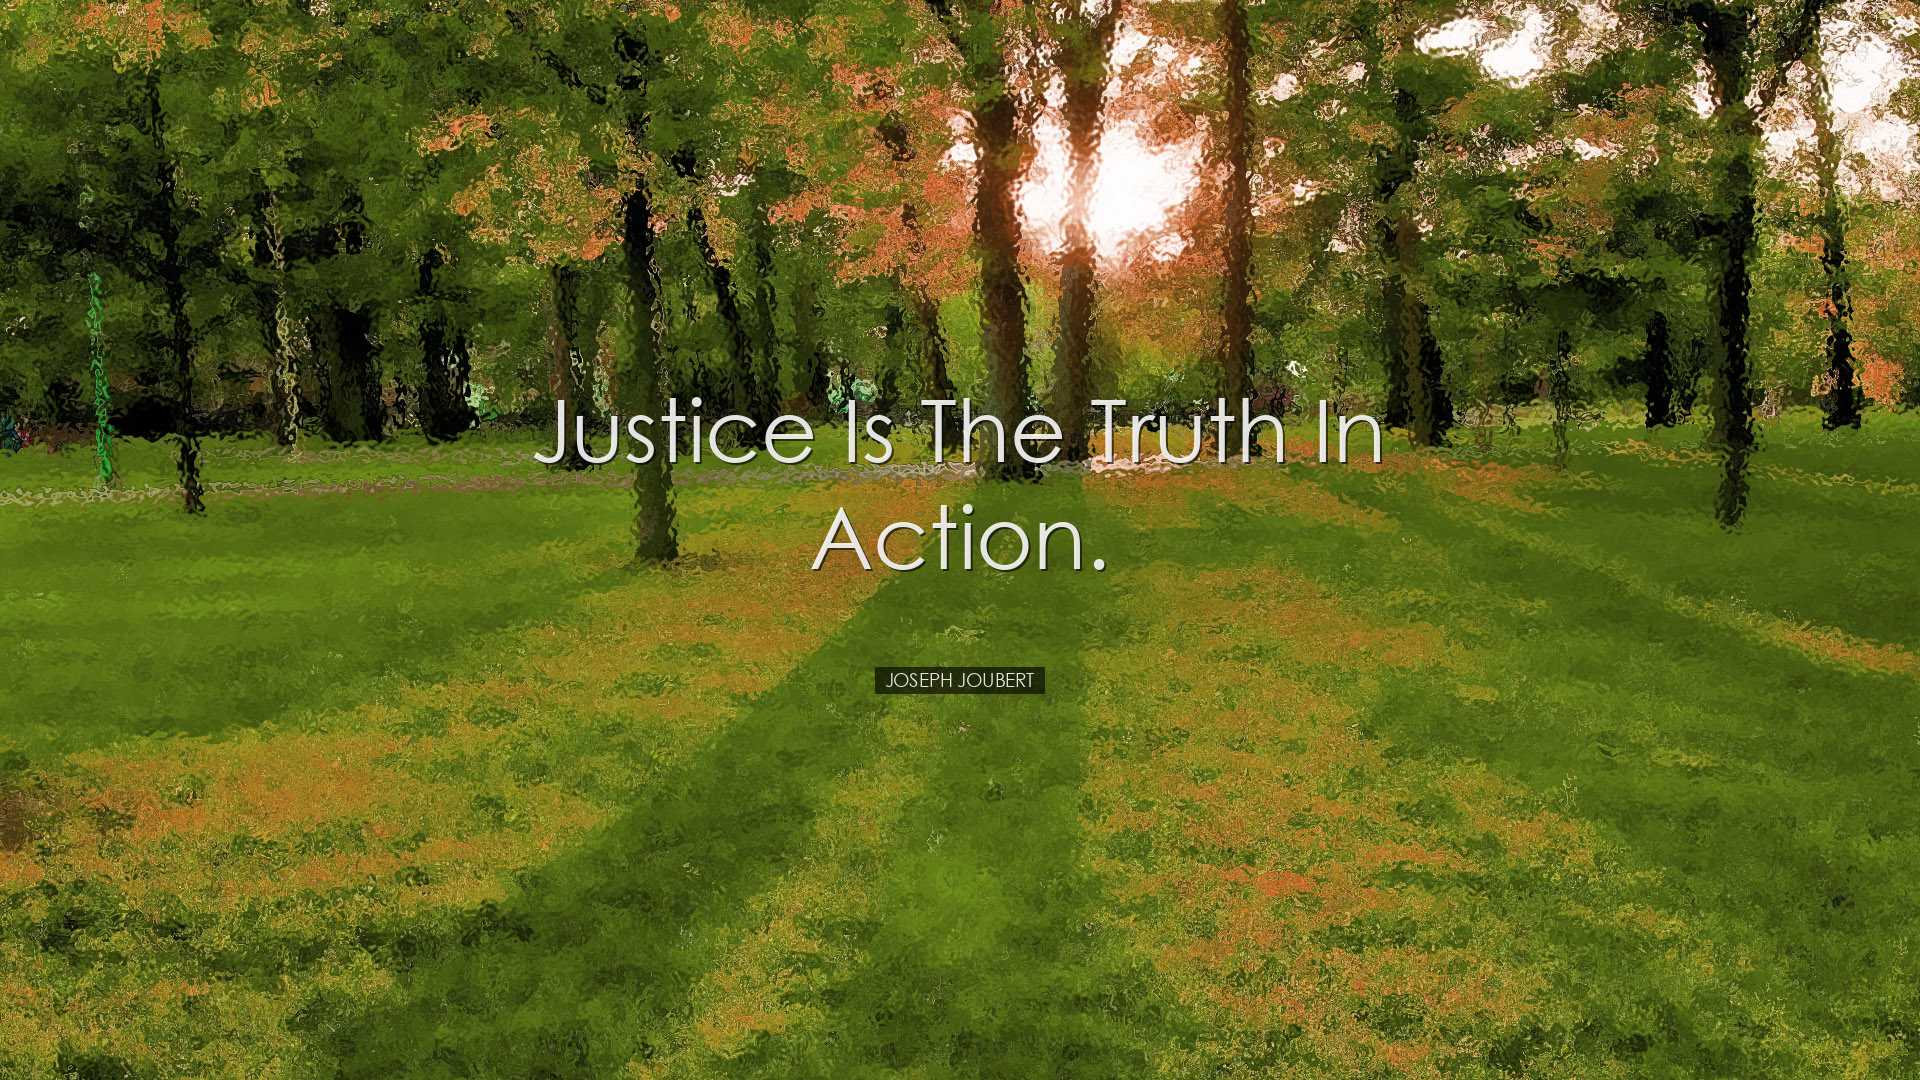 Justice is the truth in action. - Joseph Joubert